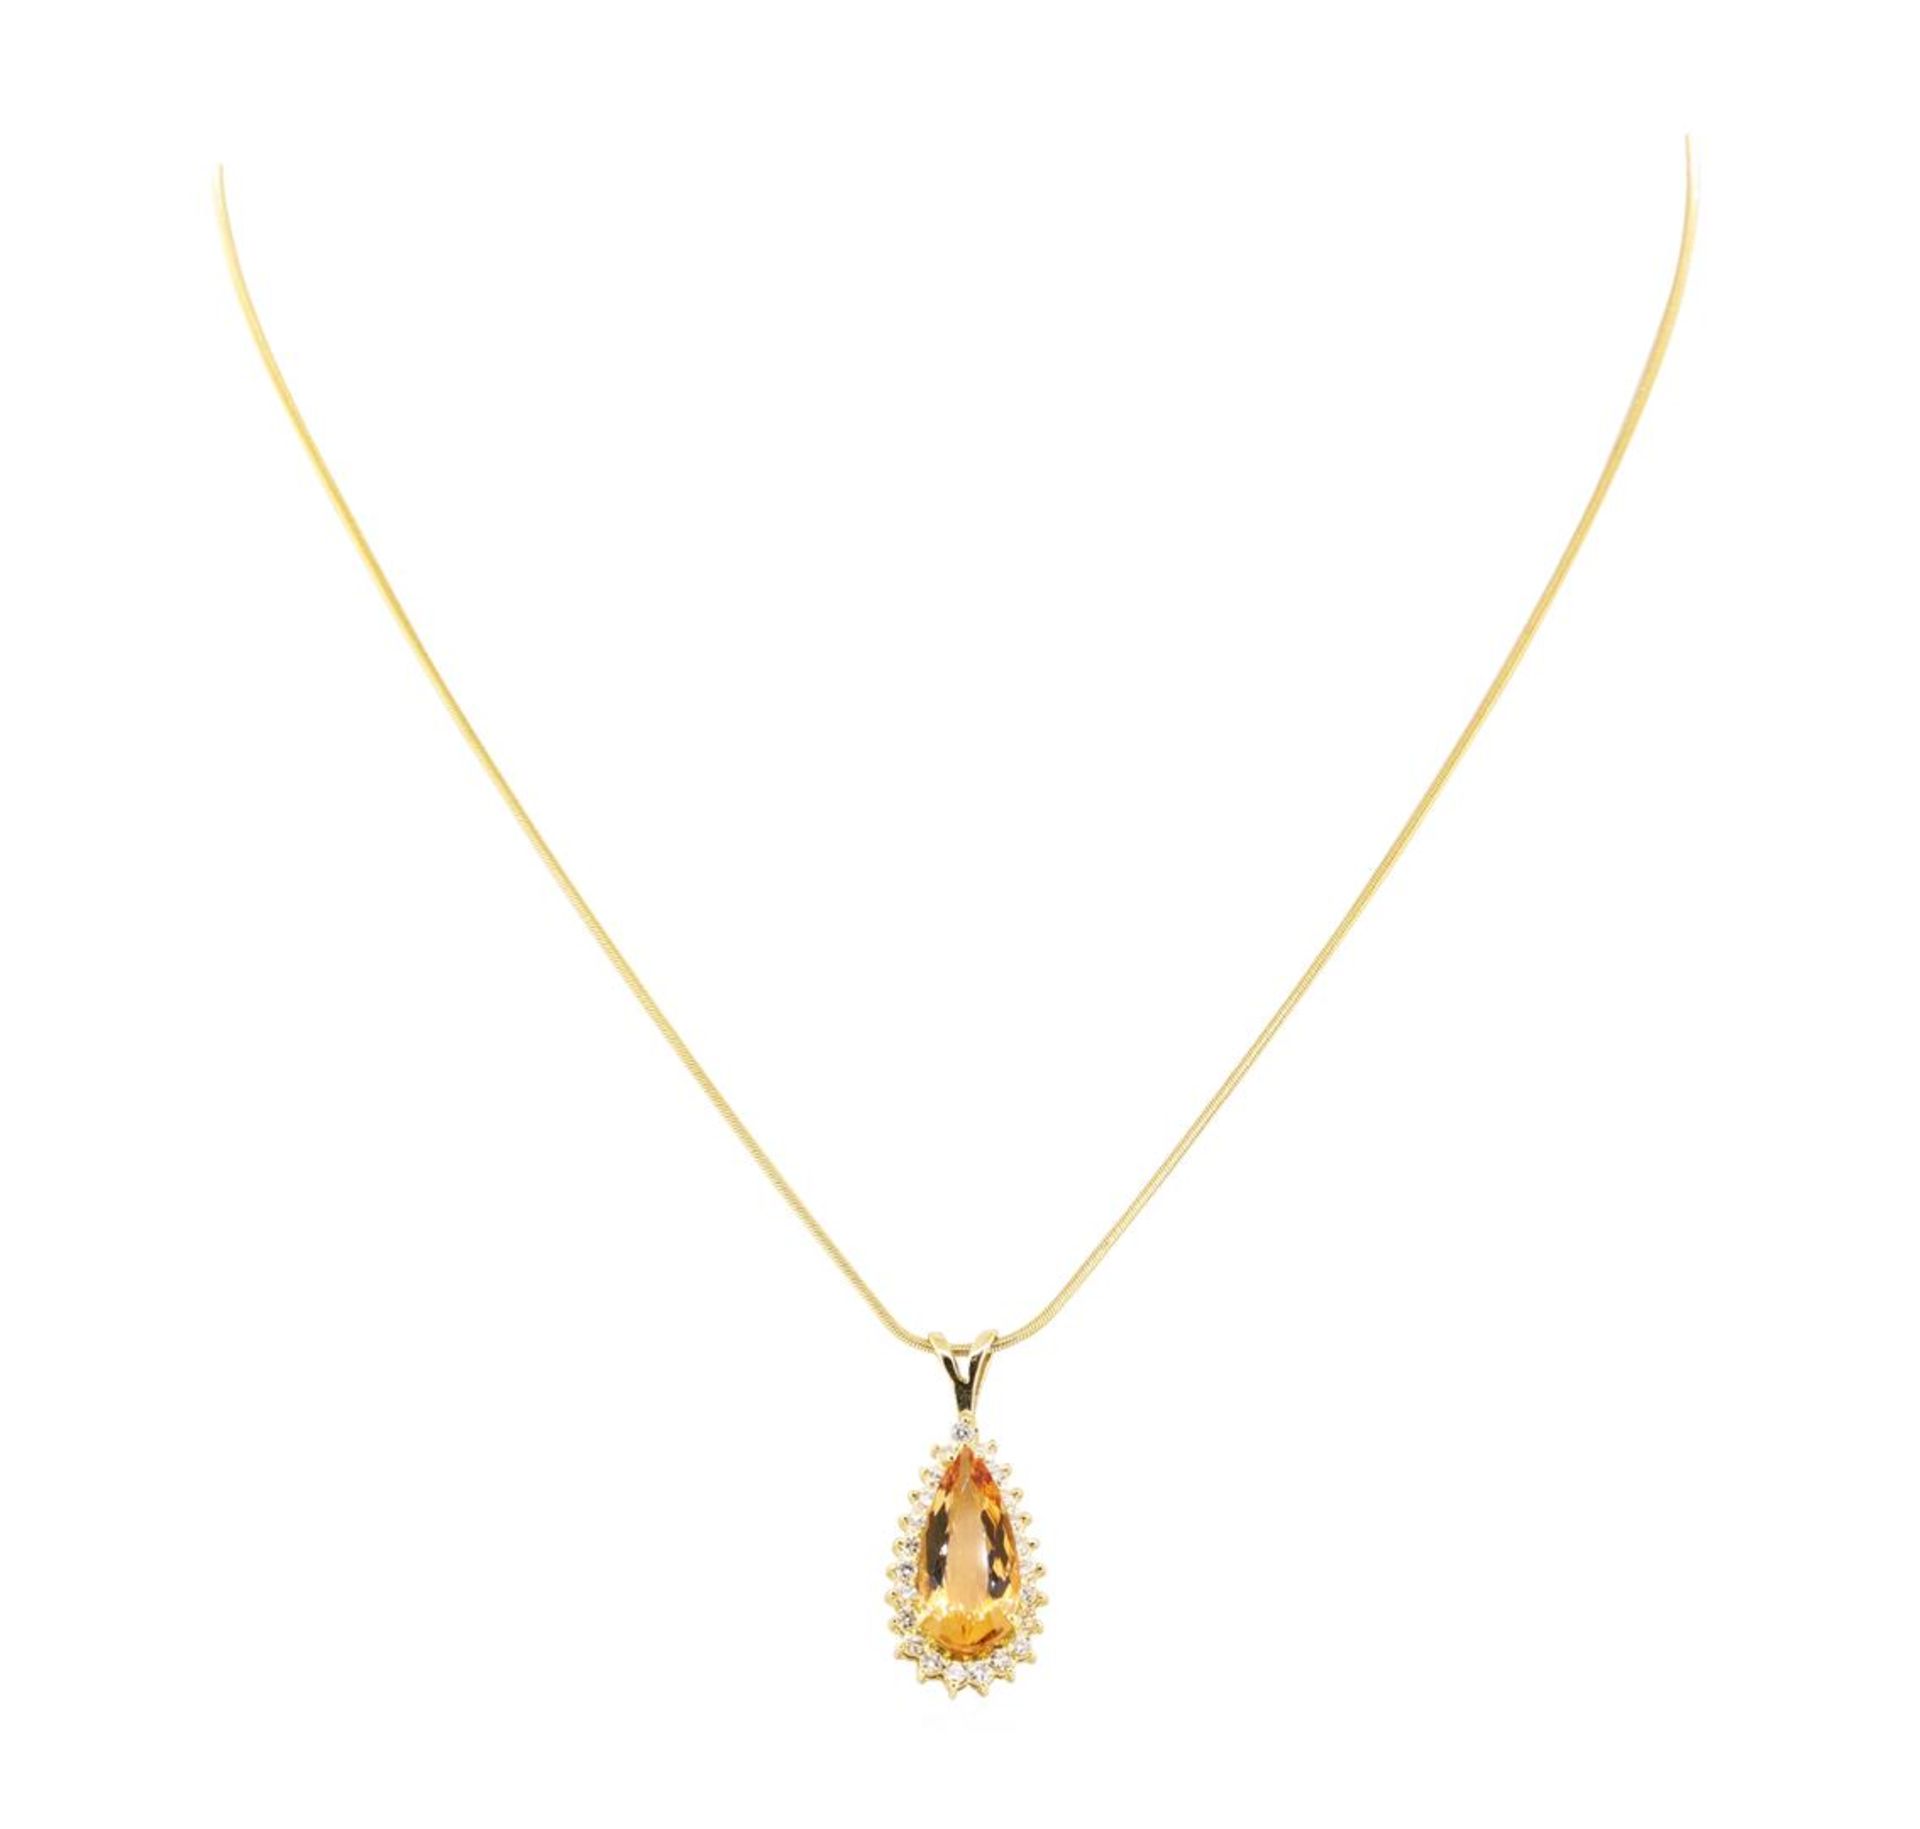 6.00 ctw Imperial Topaz And Diamond Pendant & Chain - 18KT Yellow Gold - Image 2 of 3